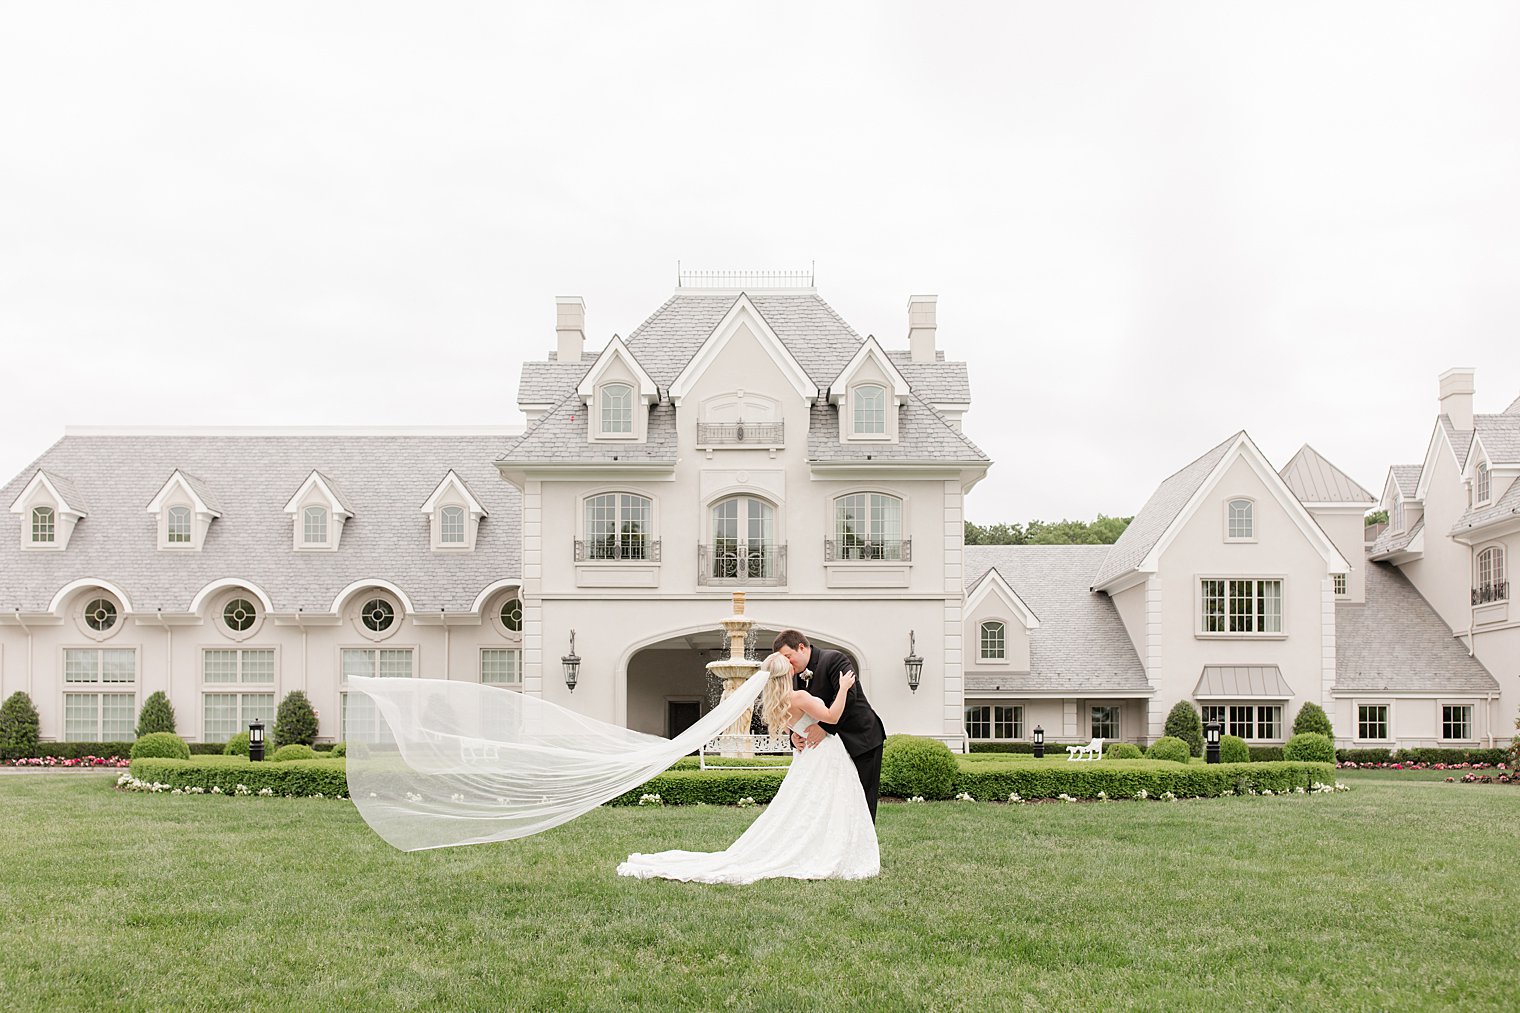 newlyweds kiss on lawn at Park Chateau Estate with bride's veil floating behind her